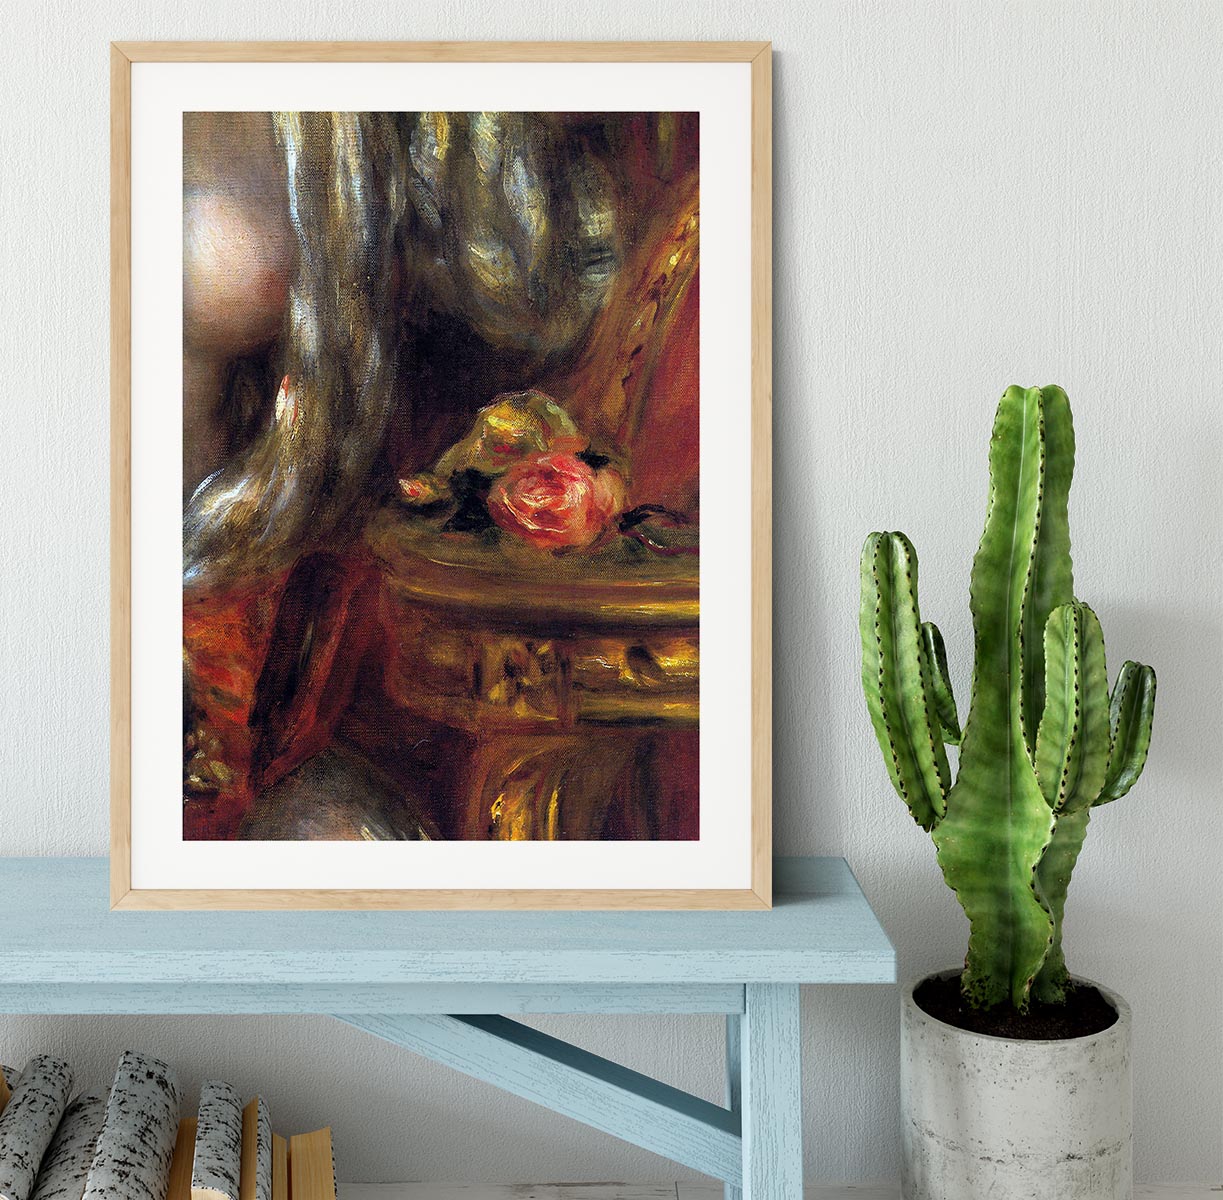 Gabrielle with jewels detail by Renoir Framed Print - Canvas Art Rocks - 3